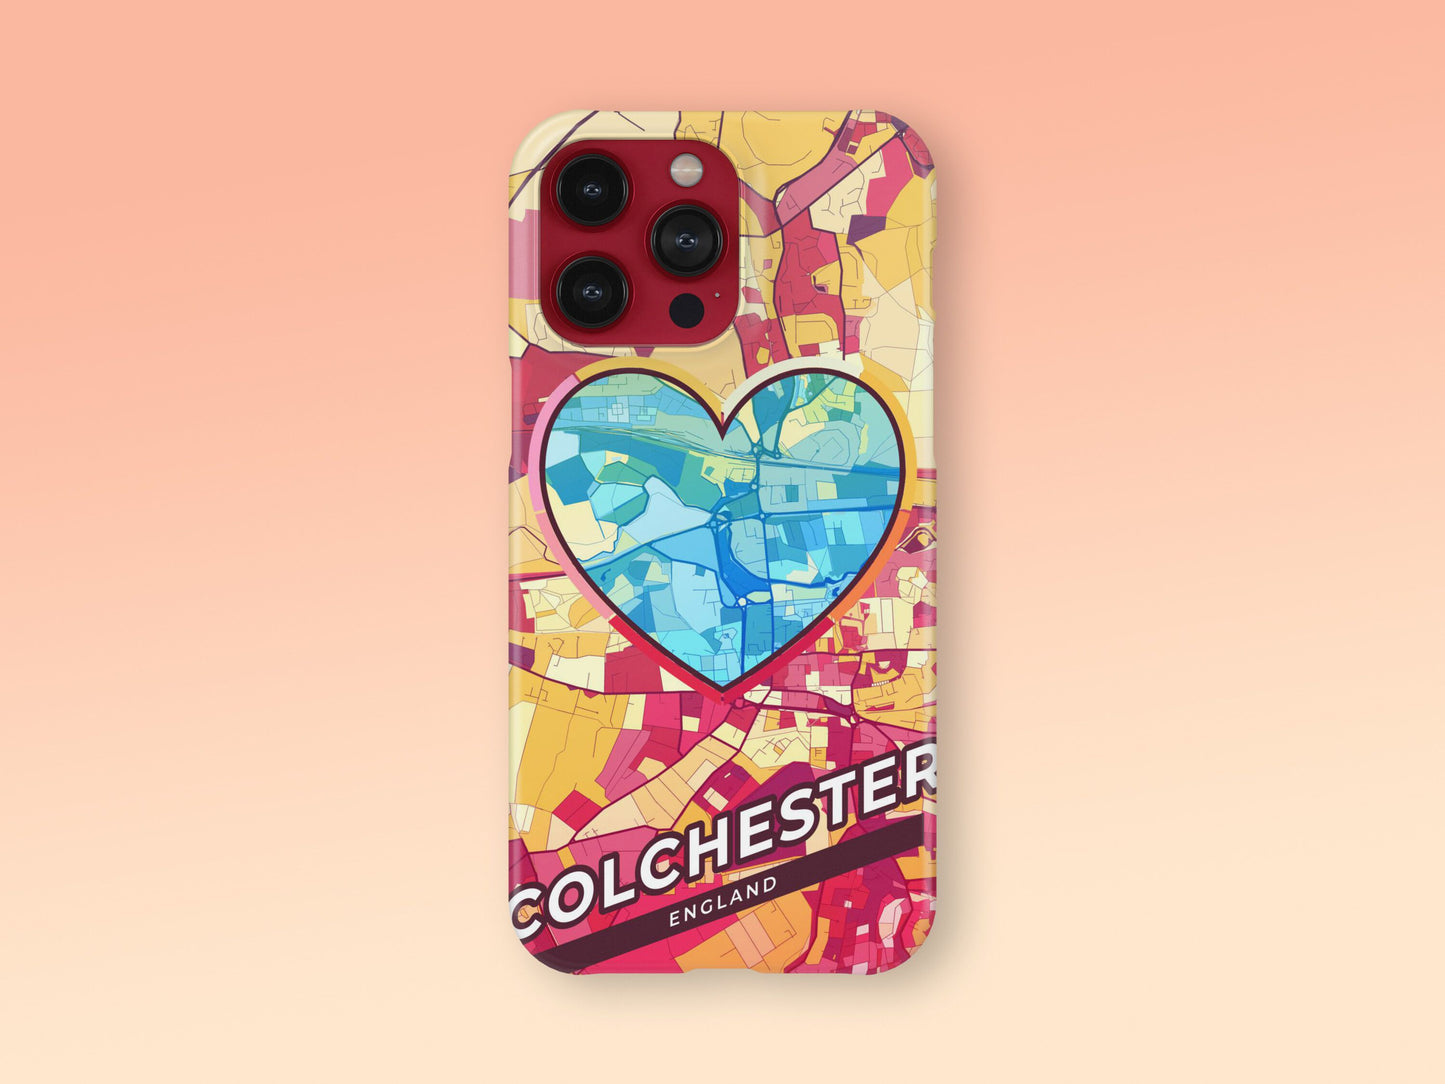 Colchester England slim phone case with colorful icon. Birthday, wedding or housewarming gift. Couple match cases. 2